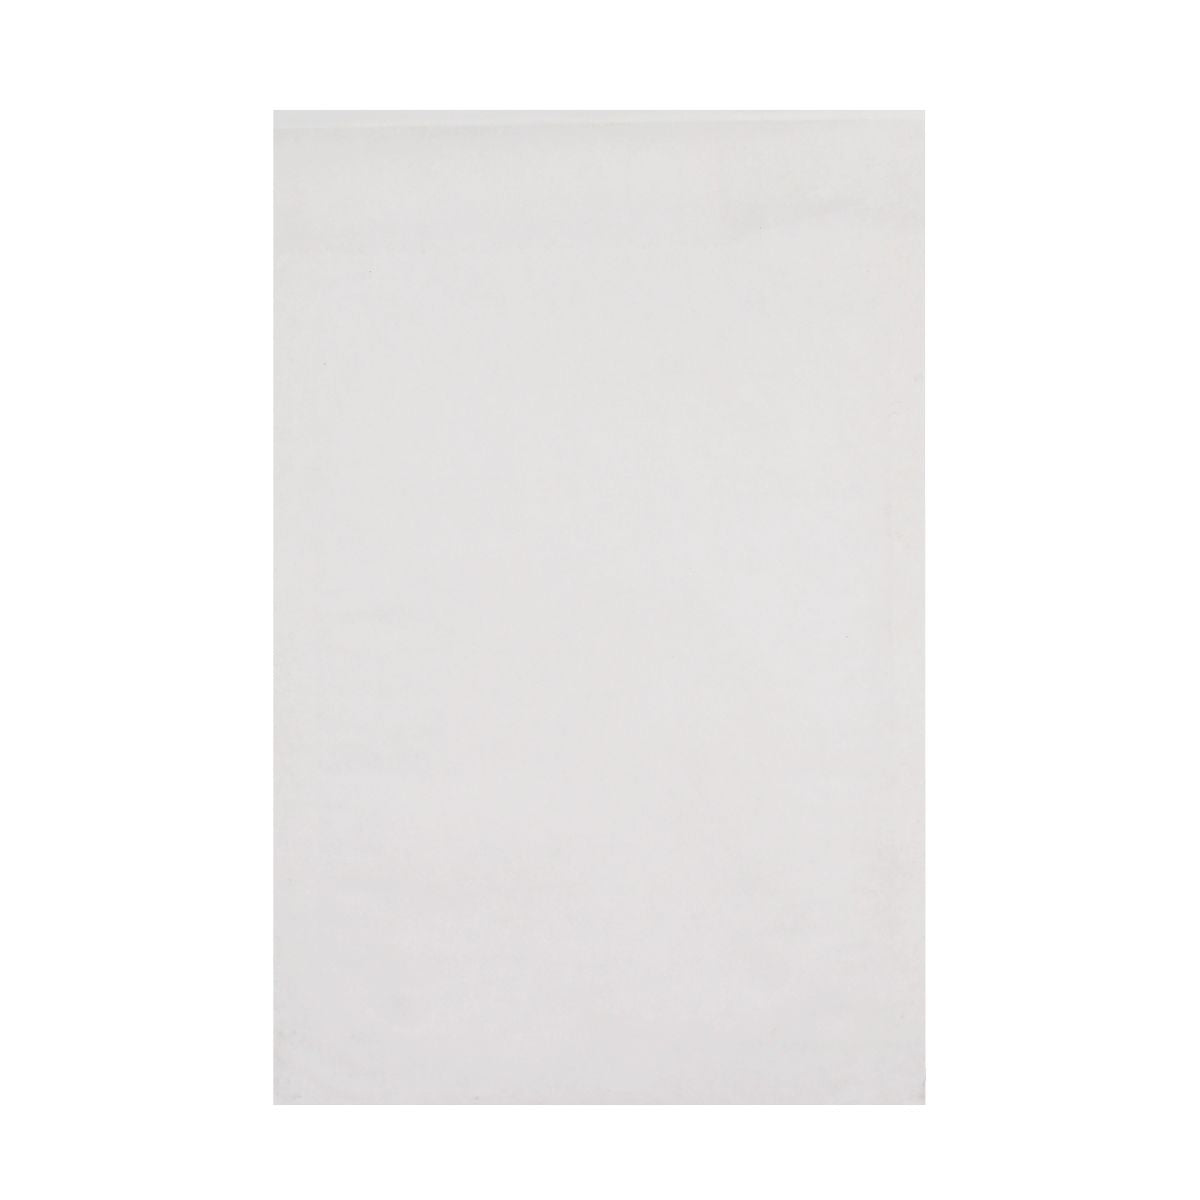 C4+ Eco Friendly Recyclable White Padded Envelope 340mm x 240mm [Qty 100] - All Colour Envelopes